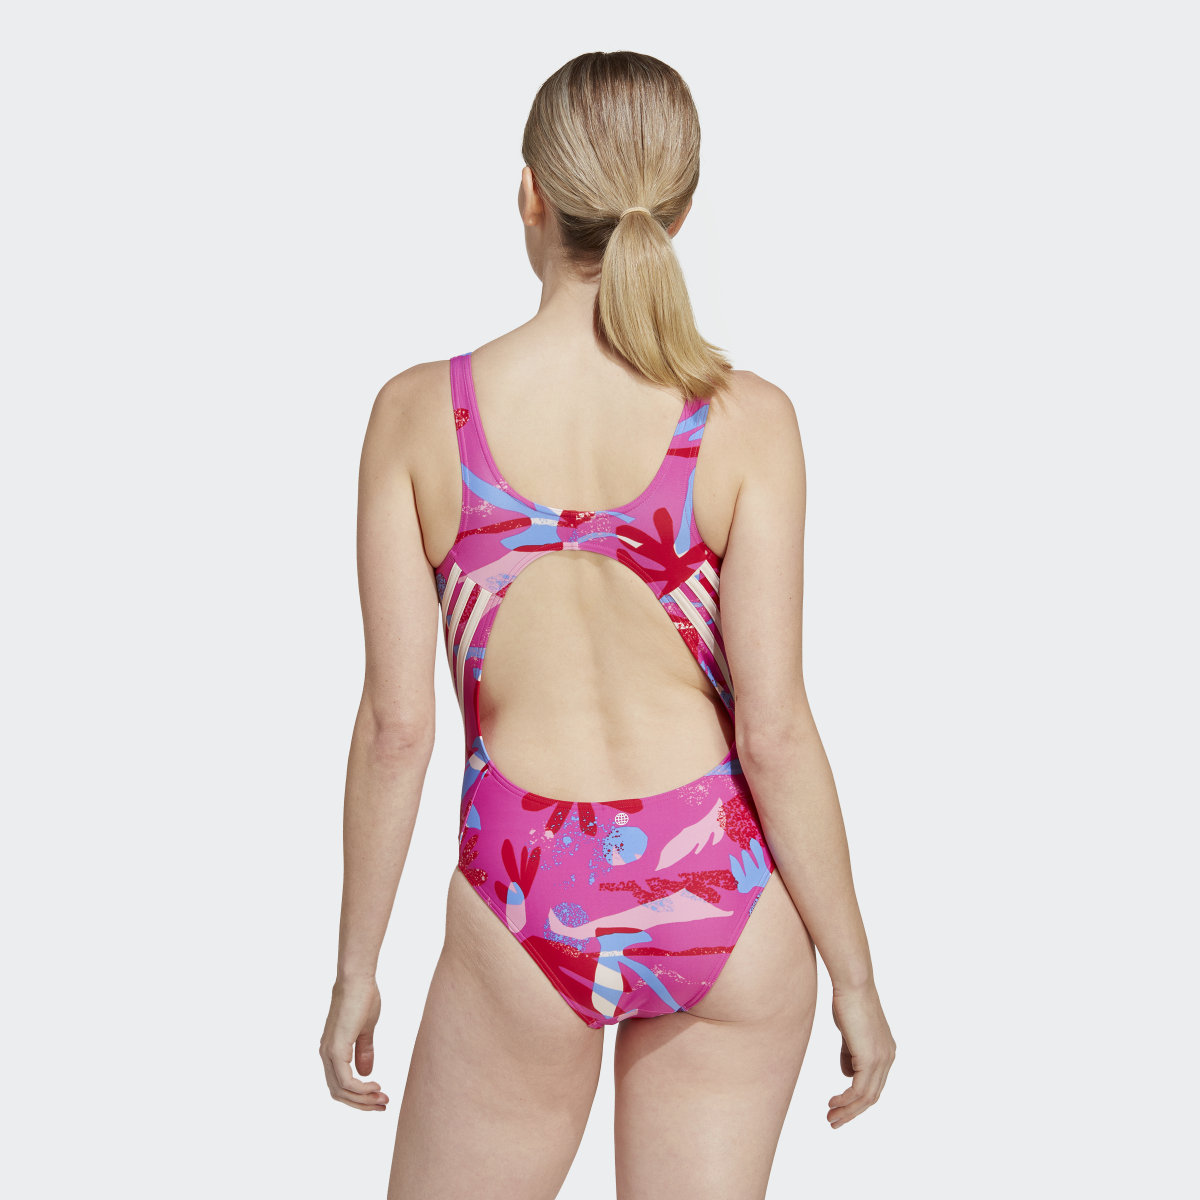 Adidas Floral 3-Stripes Swimsuit. 4